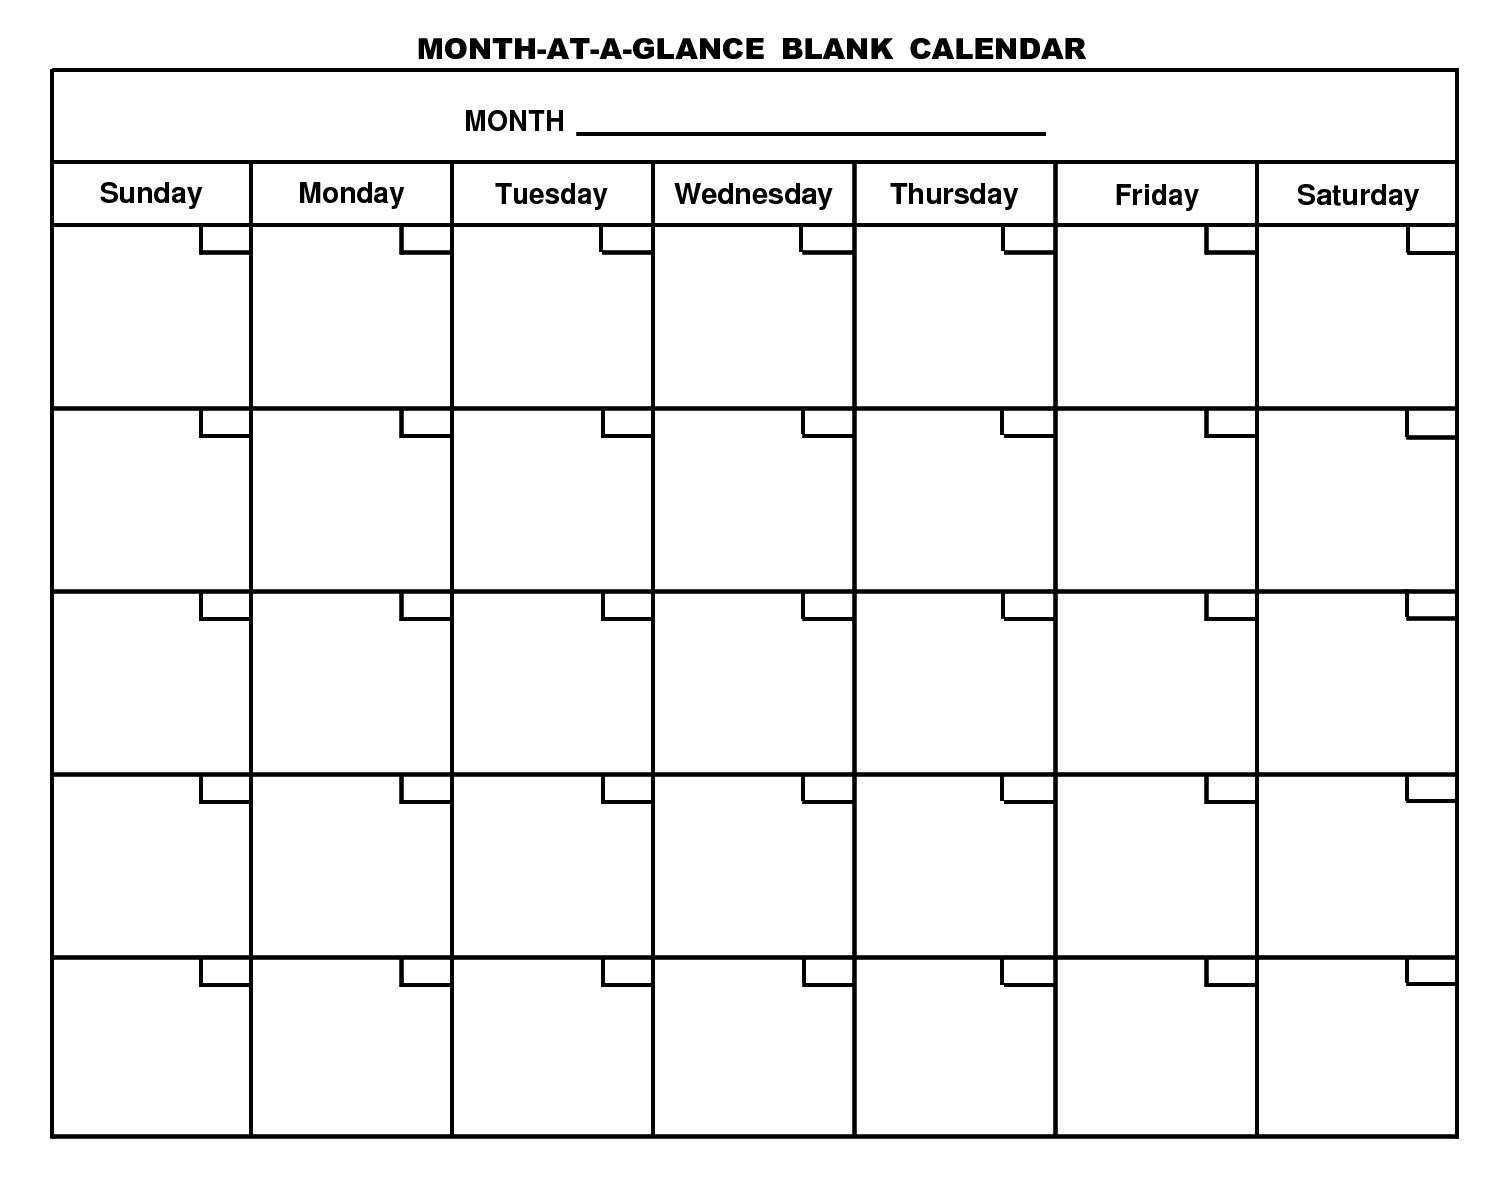 For Month At A Glance Blank Calendar Template - Free-Printable Monthly At A Glance Calendar